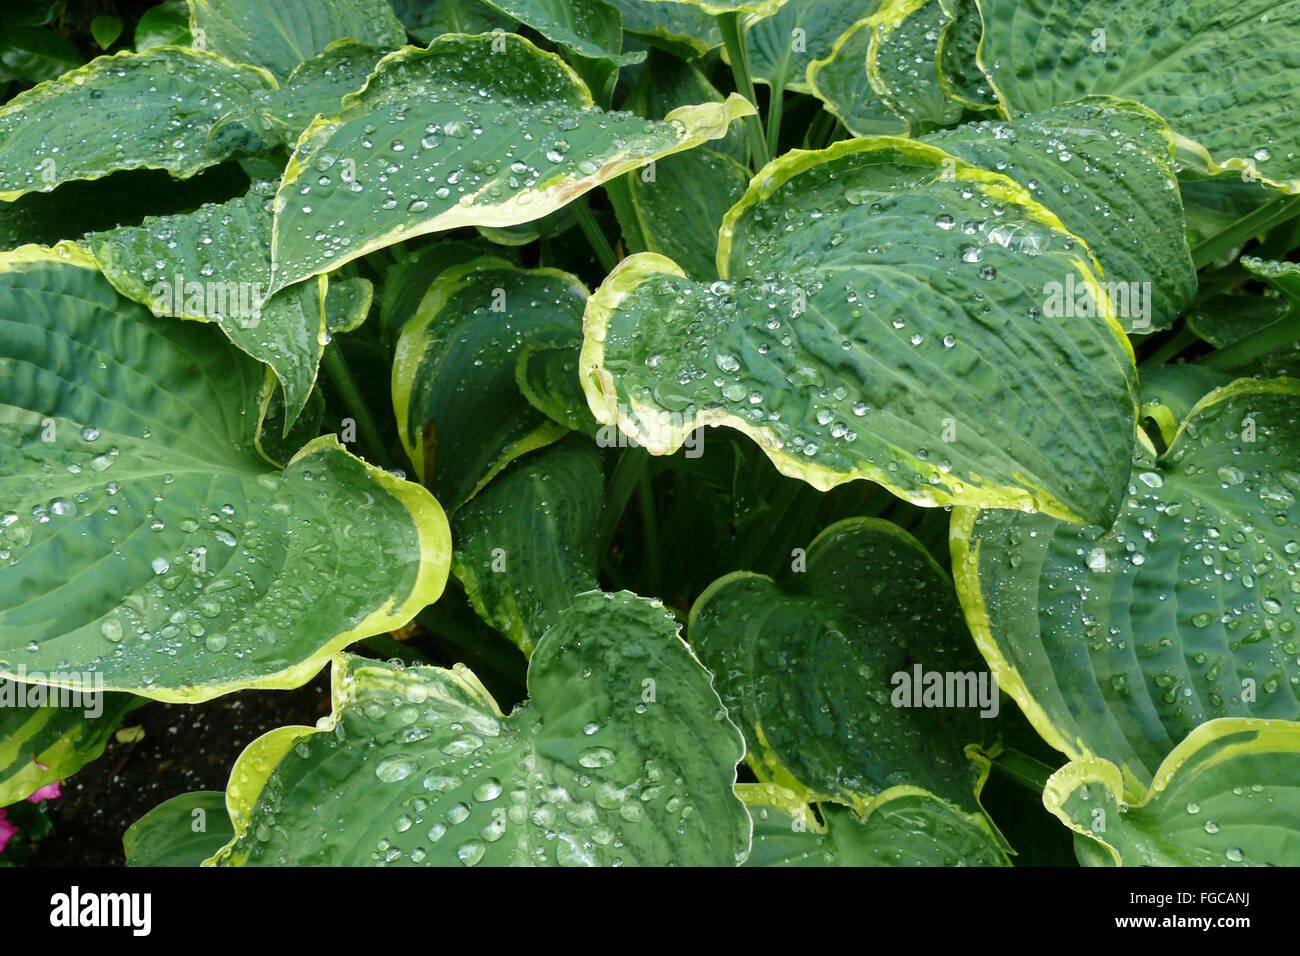 Hosta, or plantain lily with raindrops on the leave.  Hosta 'parasol' variety or cultivar. Stock Photo